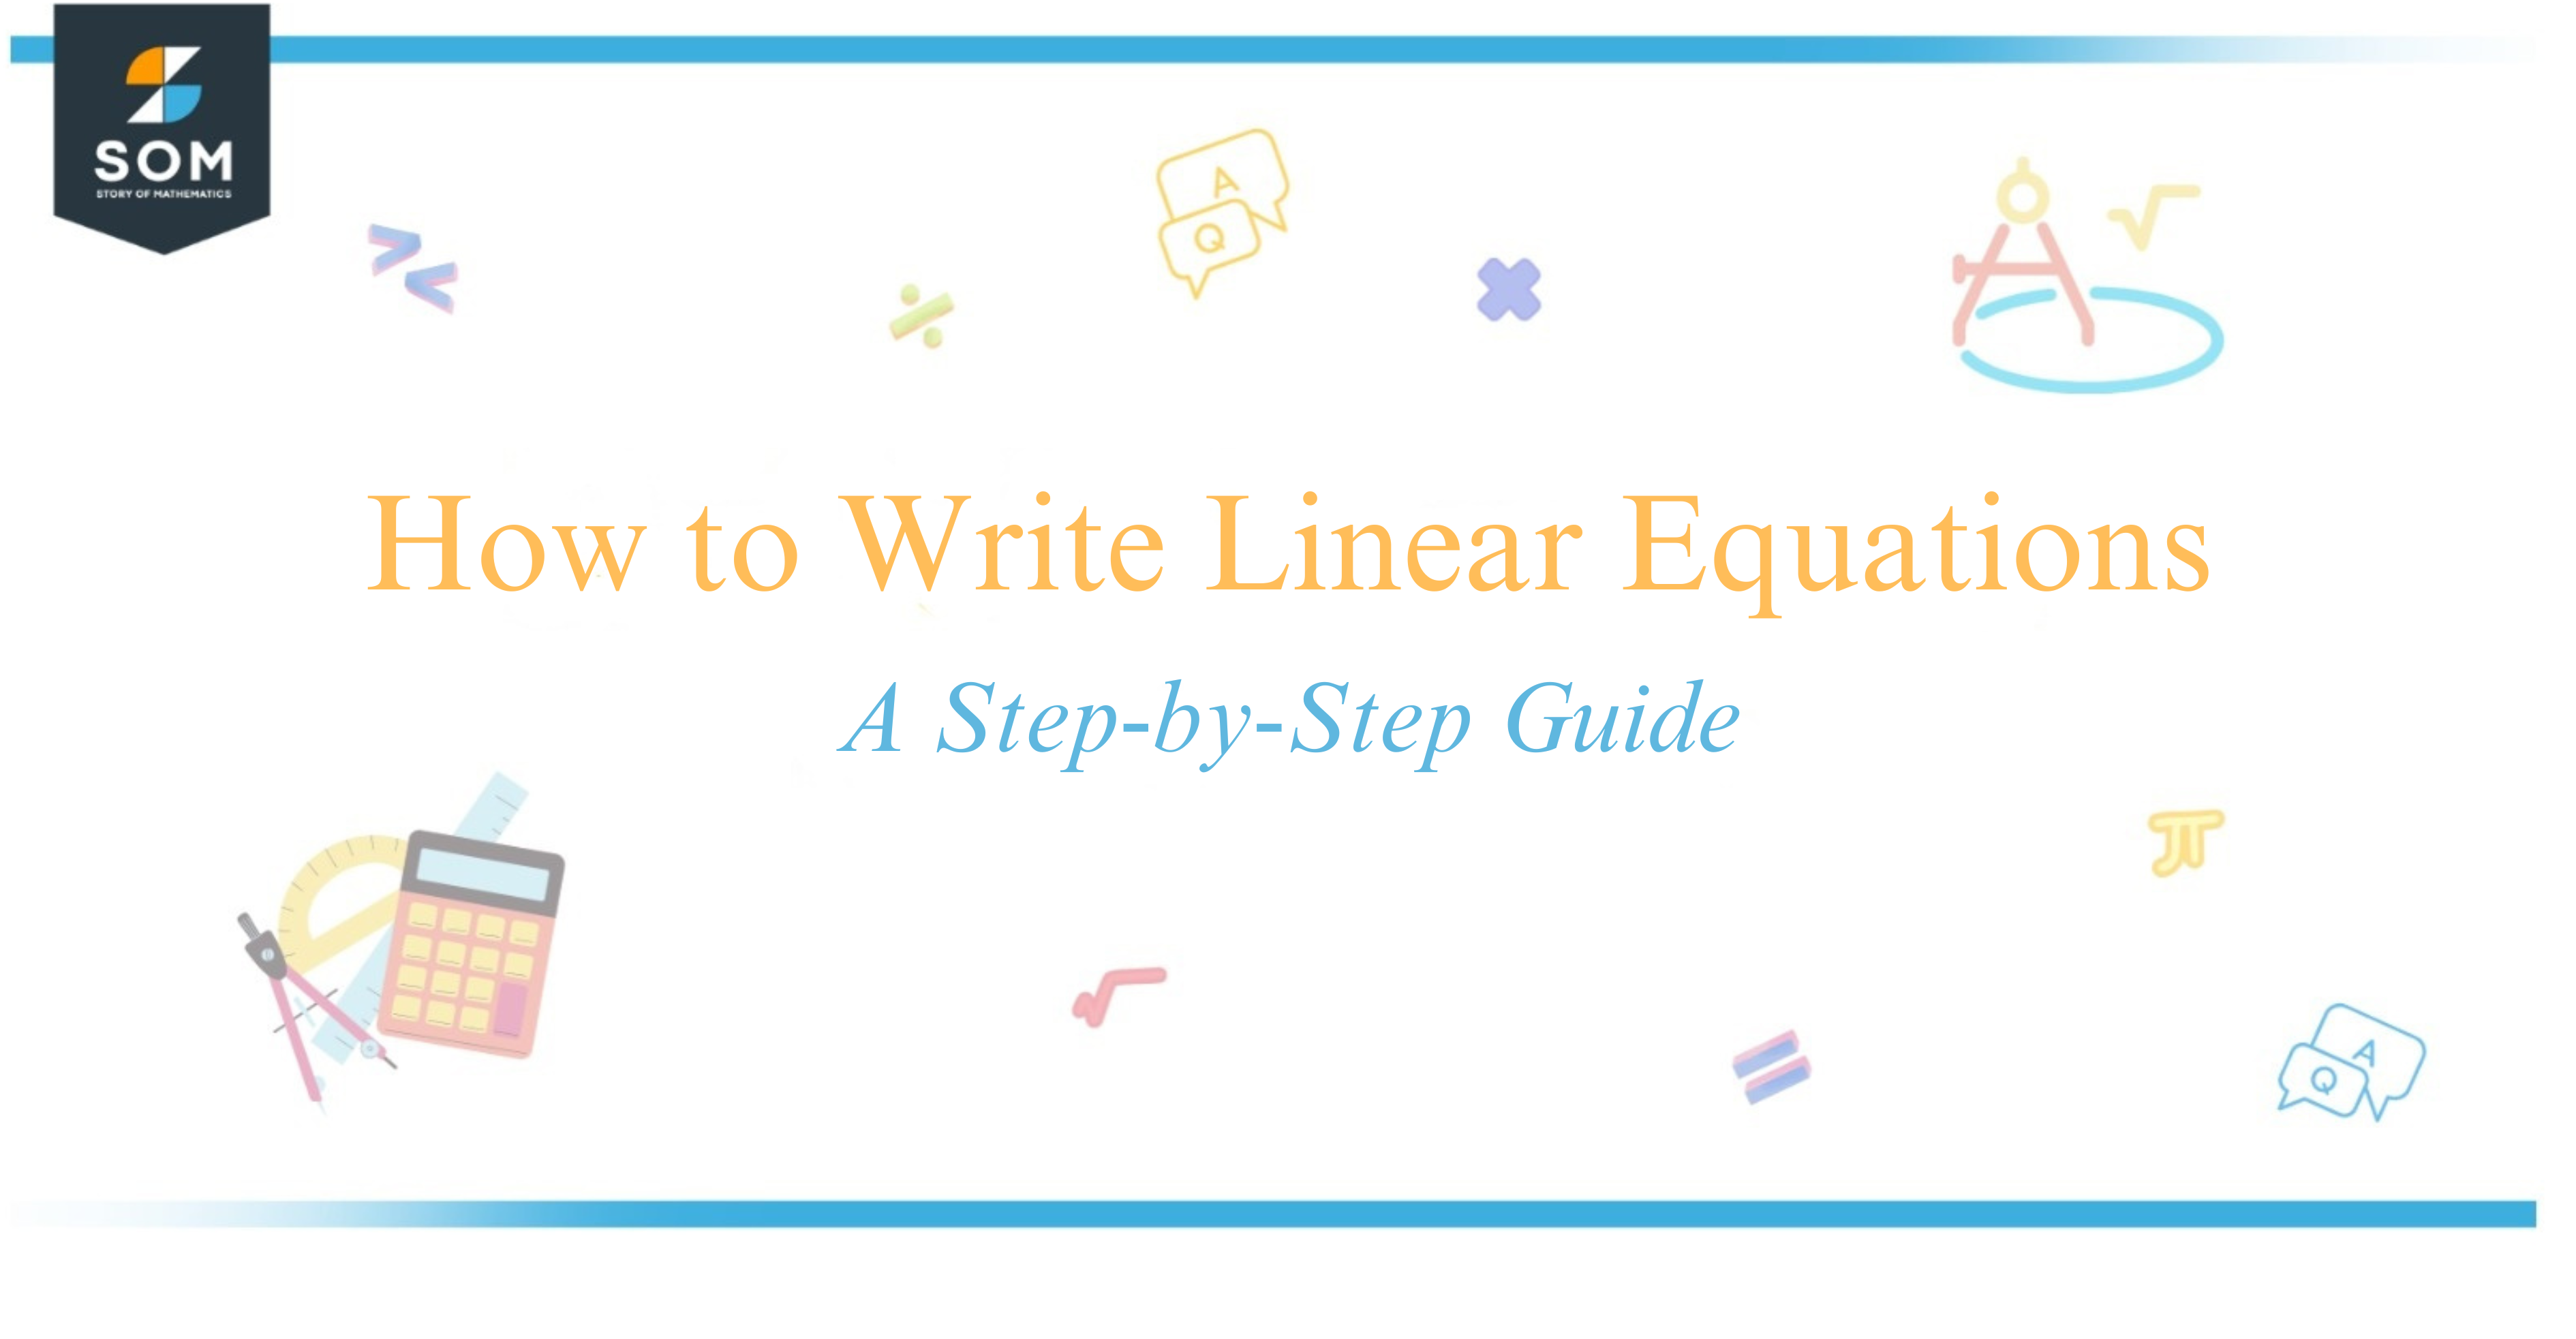 How to Write Linear Equations A Step-by-Step Guide